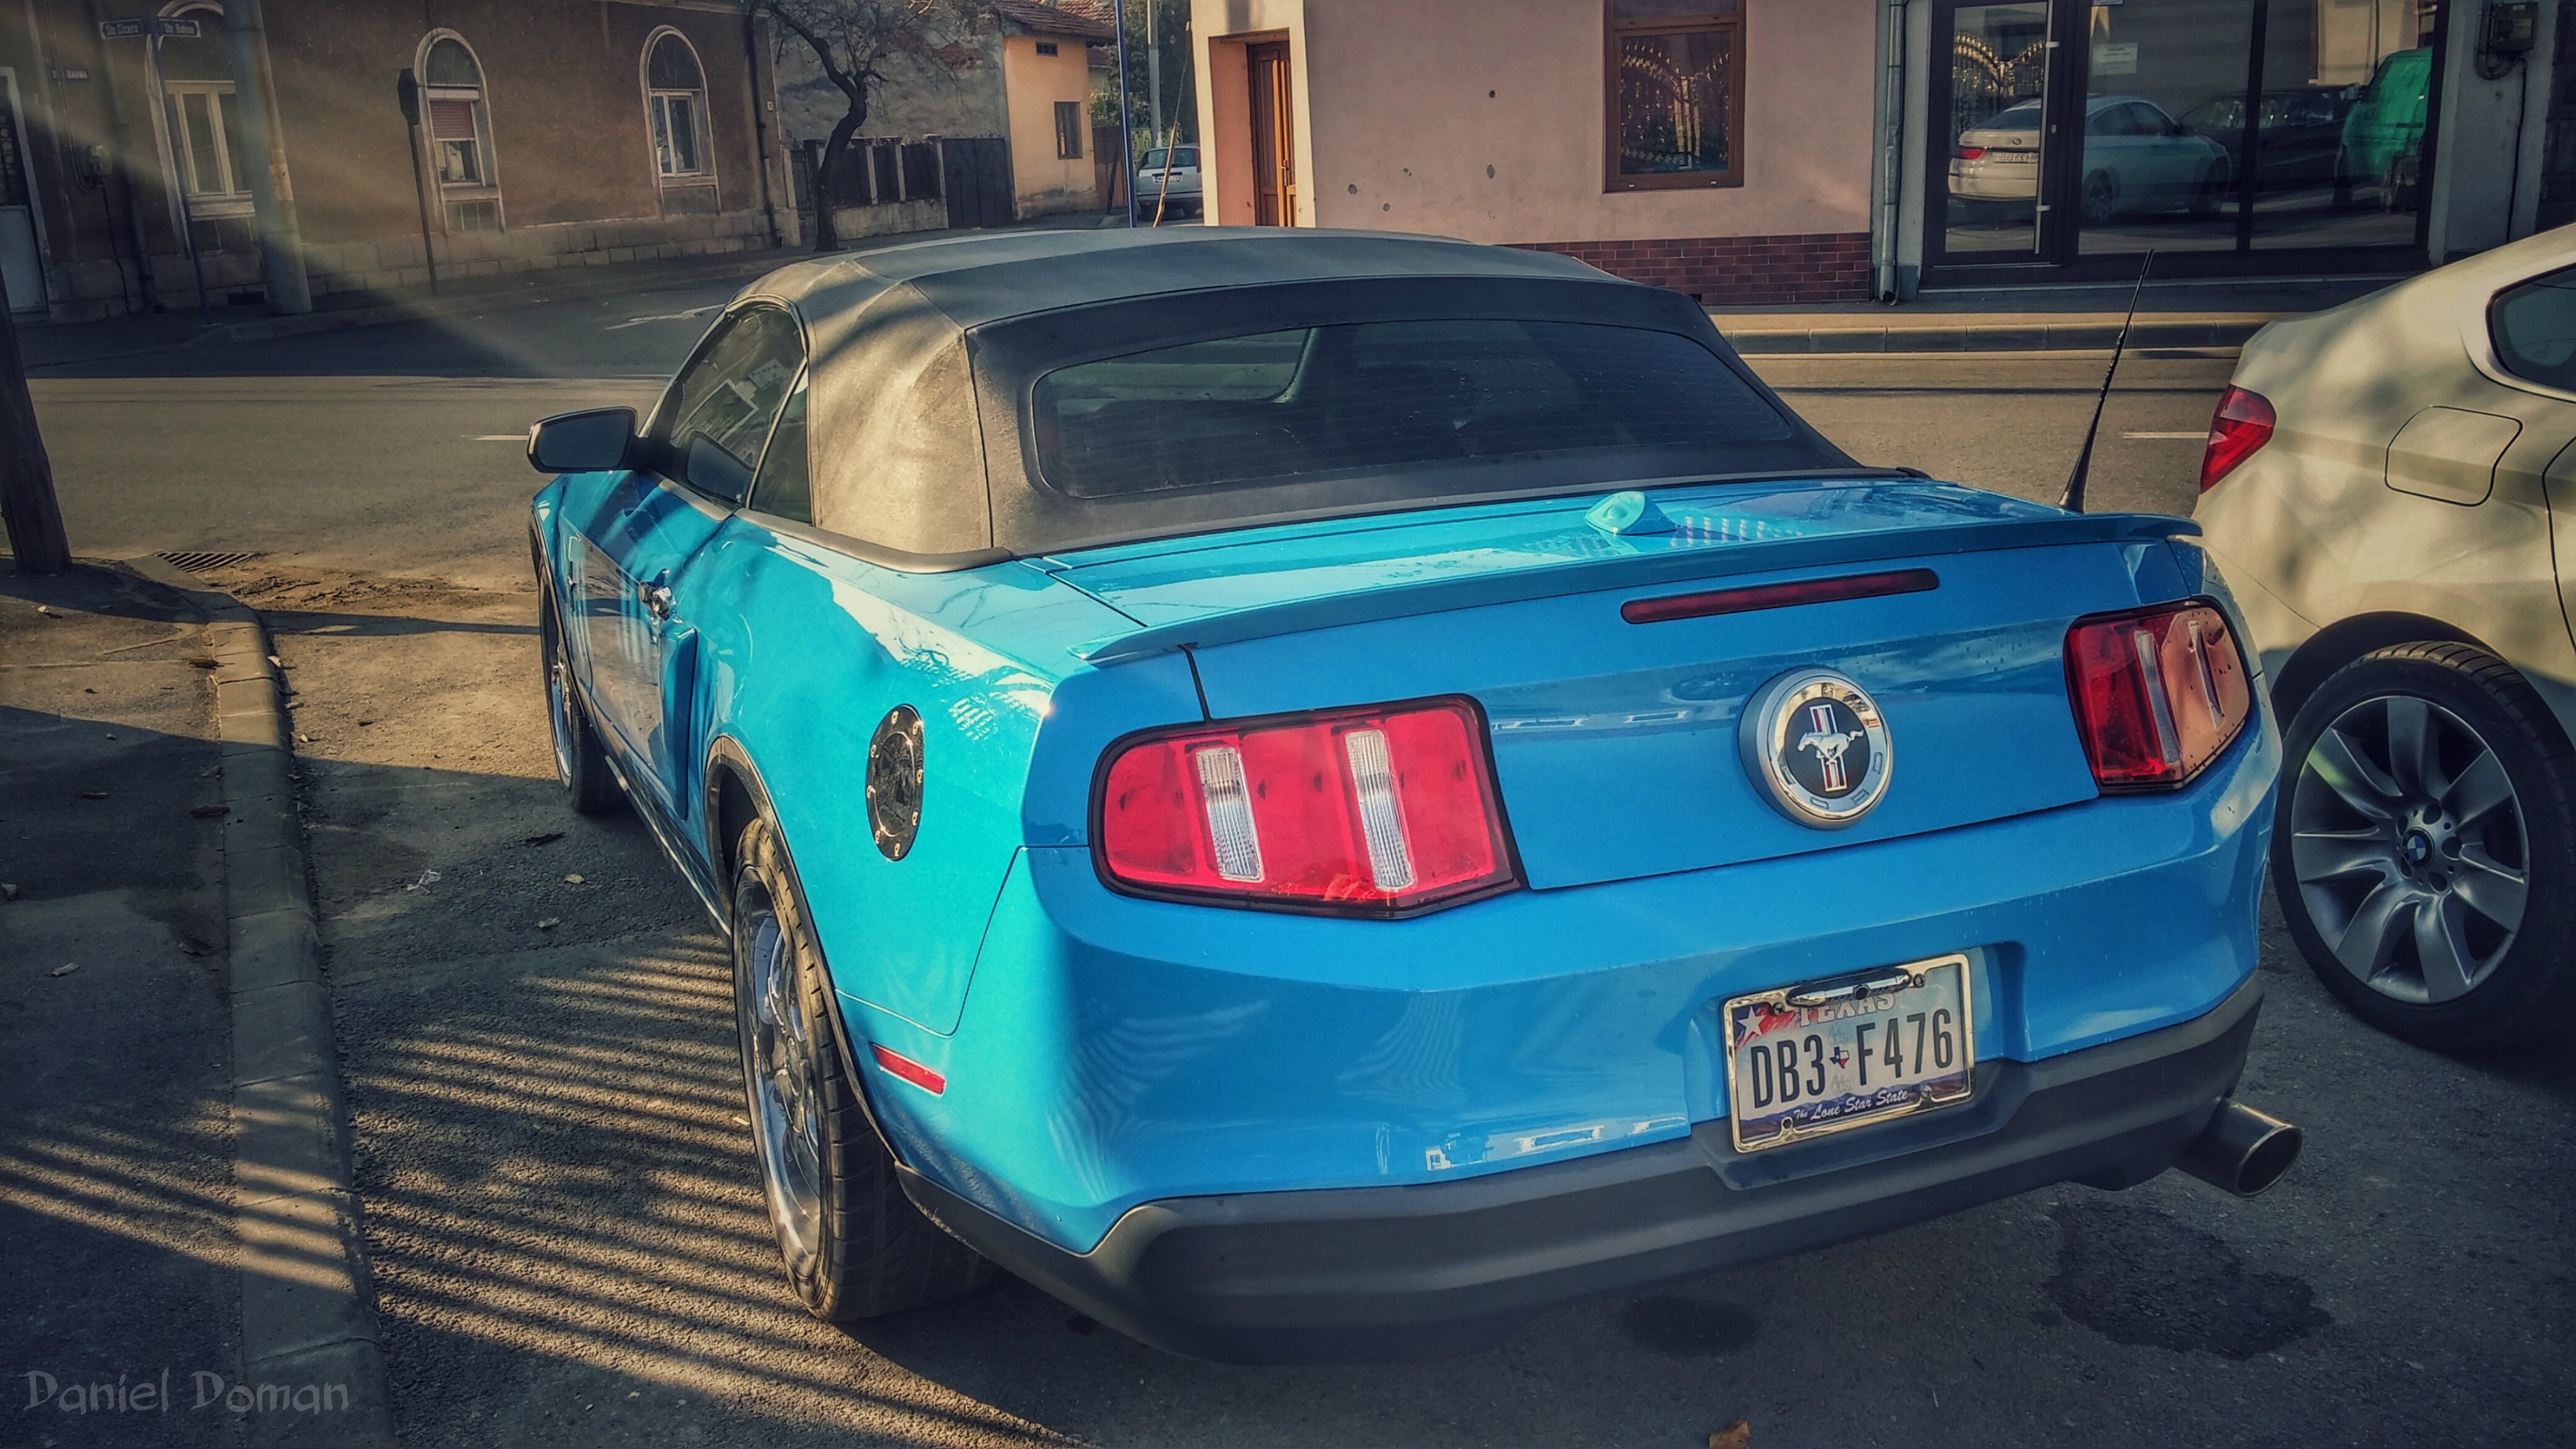 cars, Blue Cars, Ford, Ford USA, Ford GT, Ford Mustang, Muscle Cars, Racing, Race Cars, City, Urban, Urban Exploring, HDR, Street, Cabrio Wallpaper